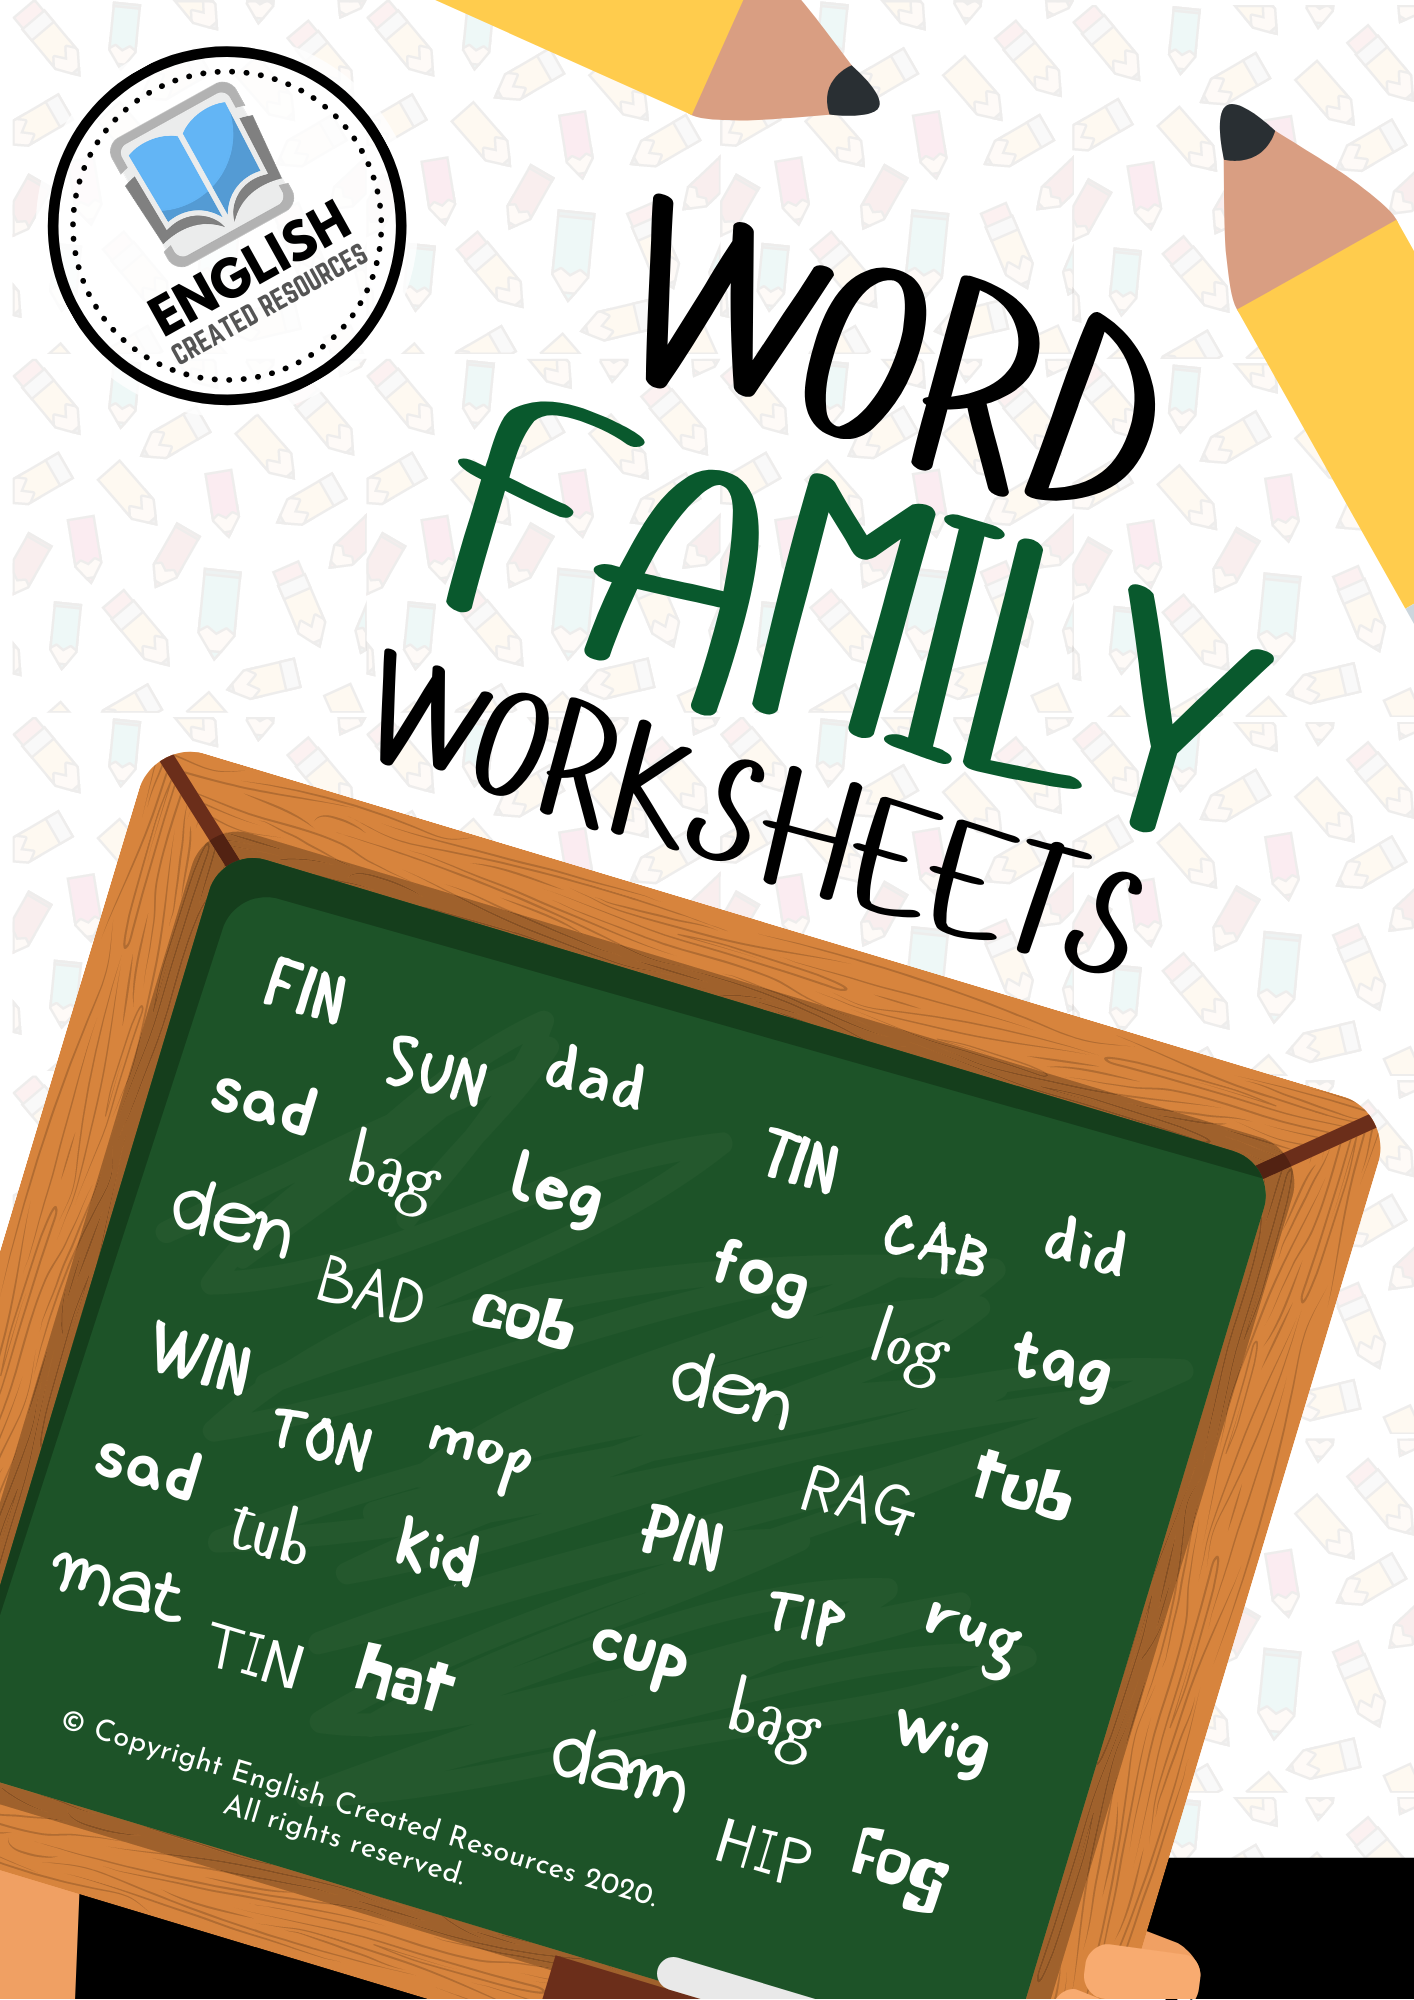 sentence-worksheets-page-4-of-6-have-fun-teaching